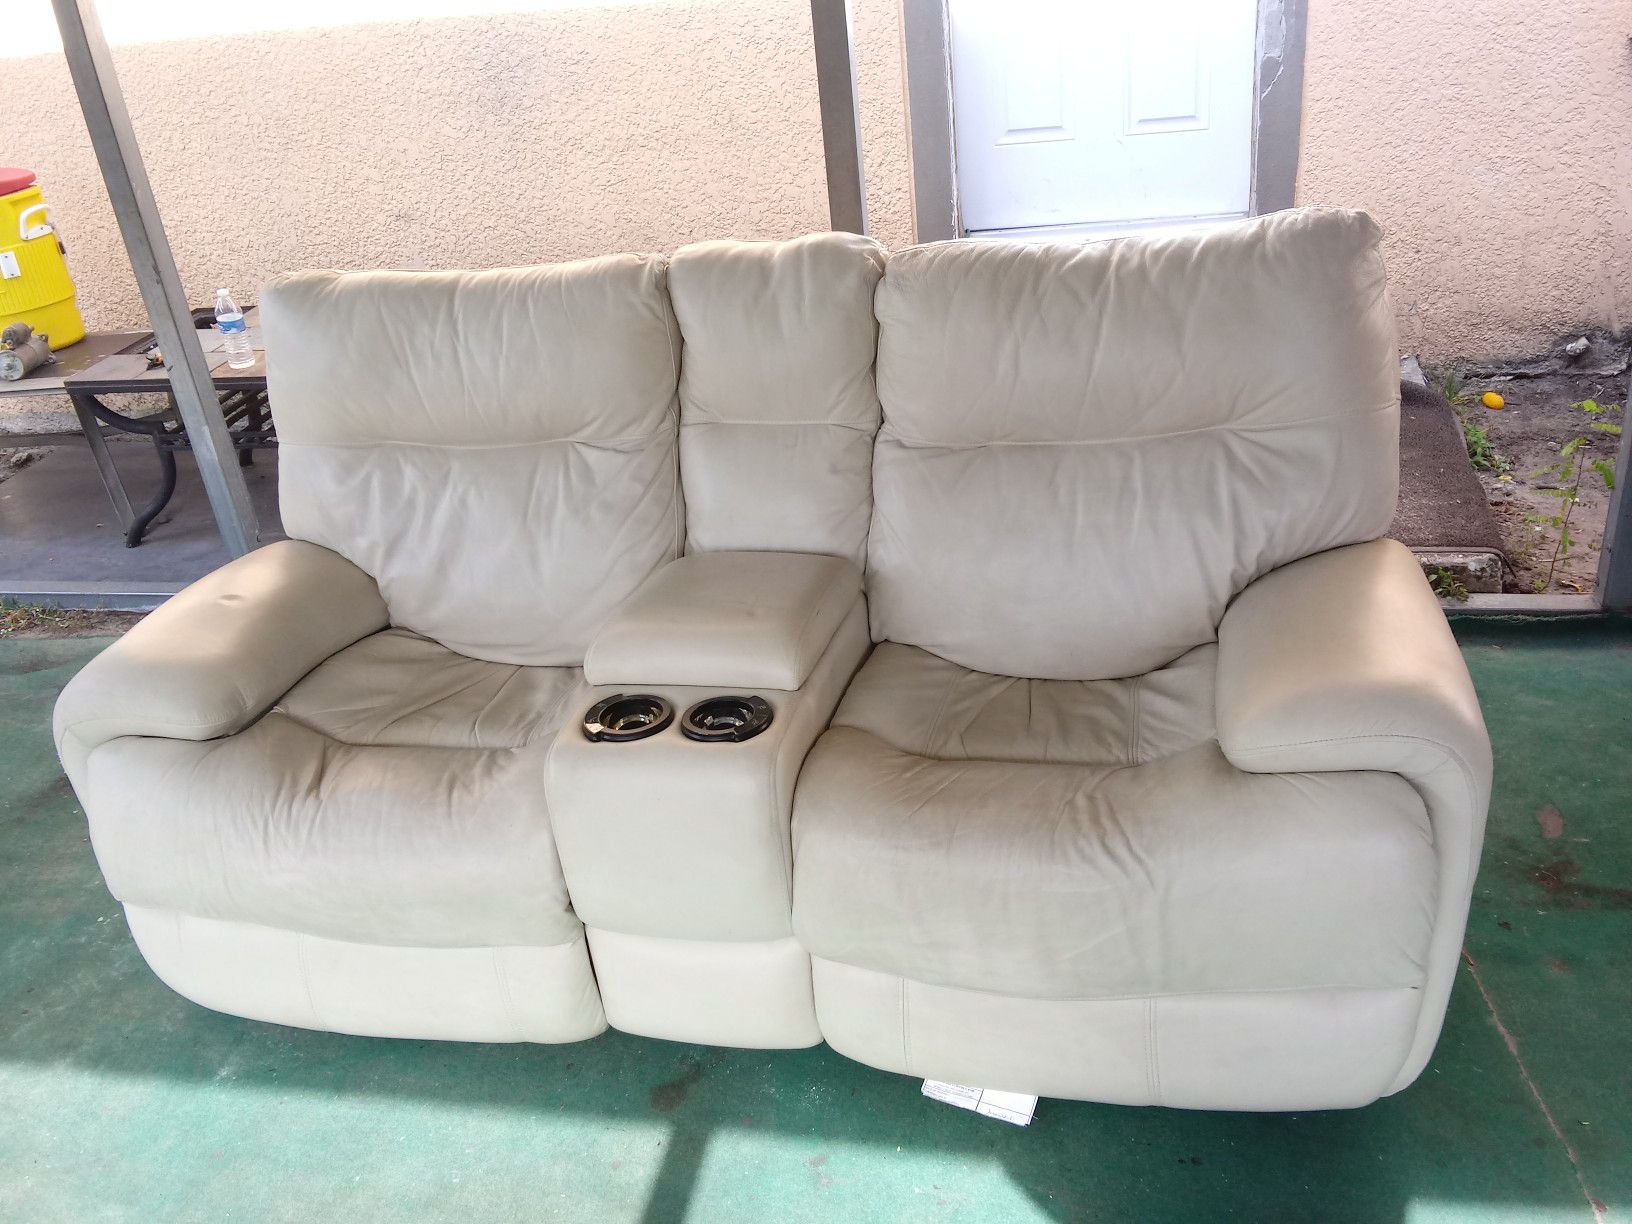 Electric Leather 2 seater recliners (beige color) FREE DELIVERY